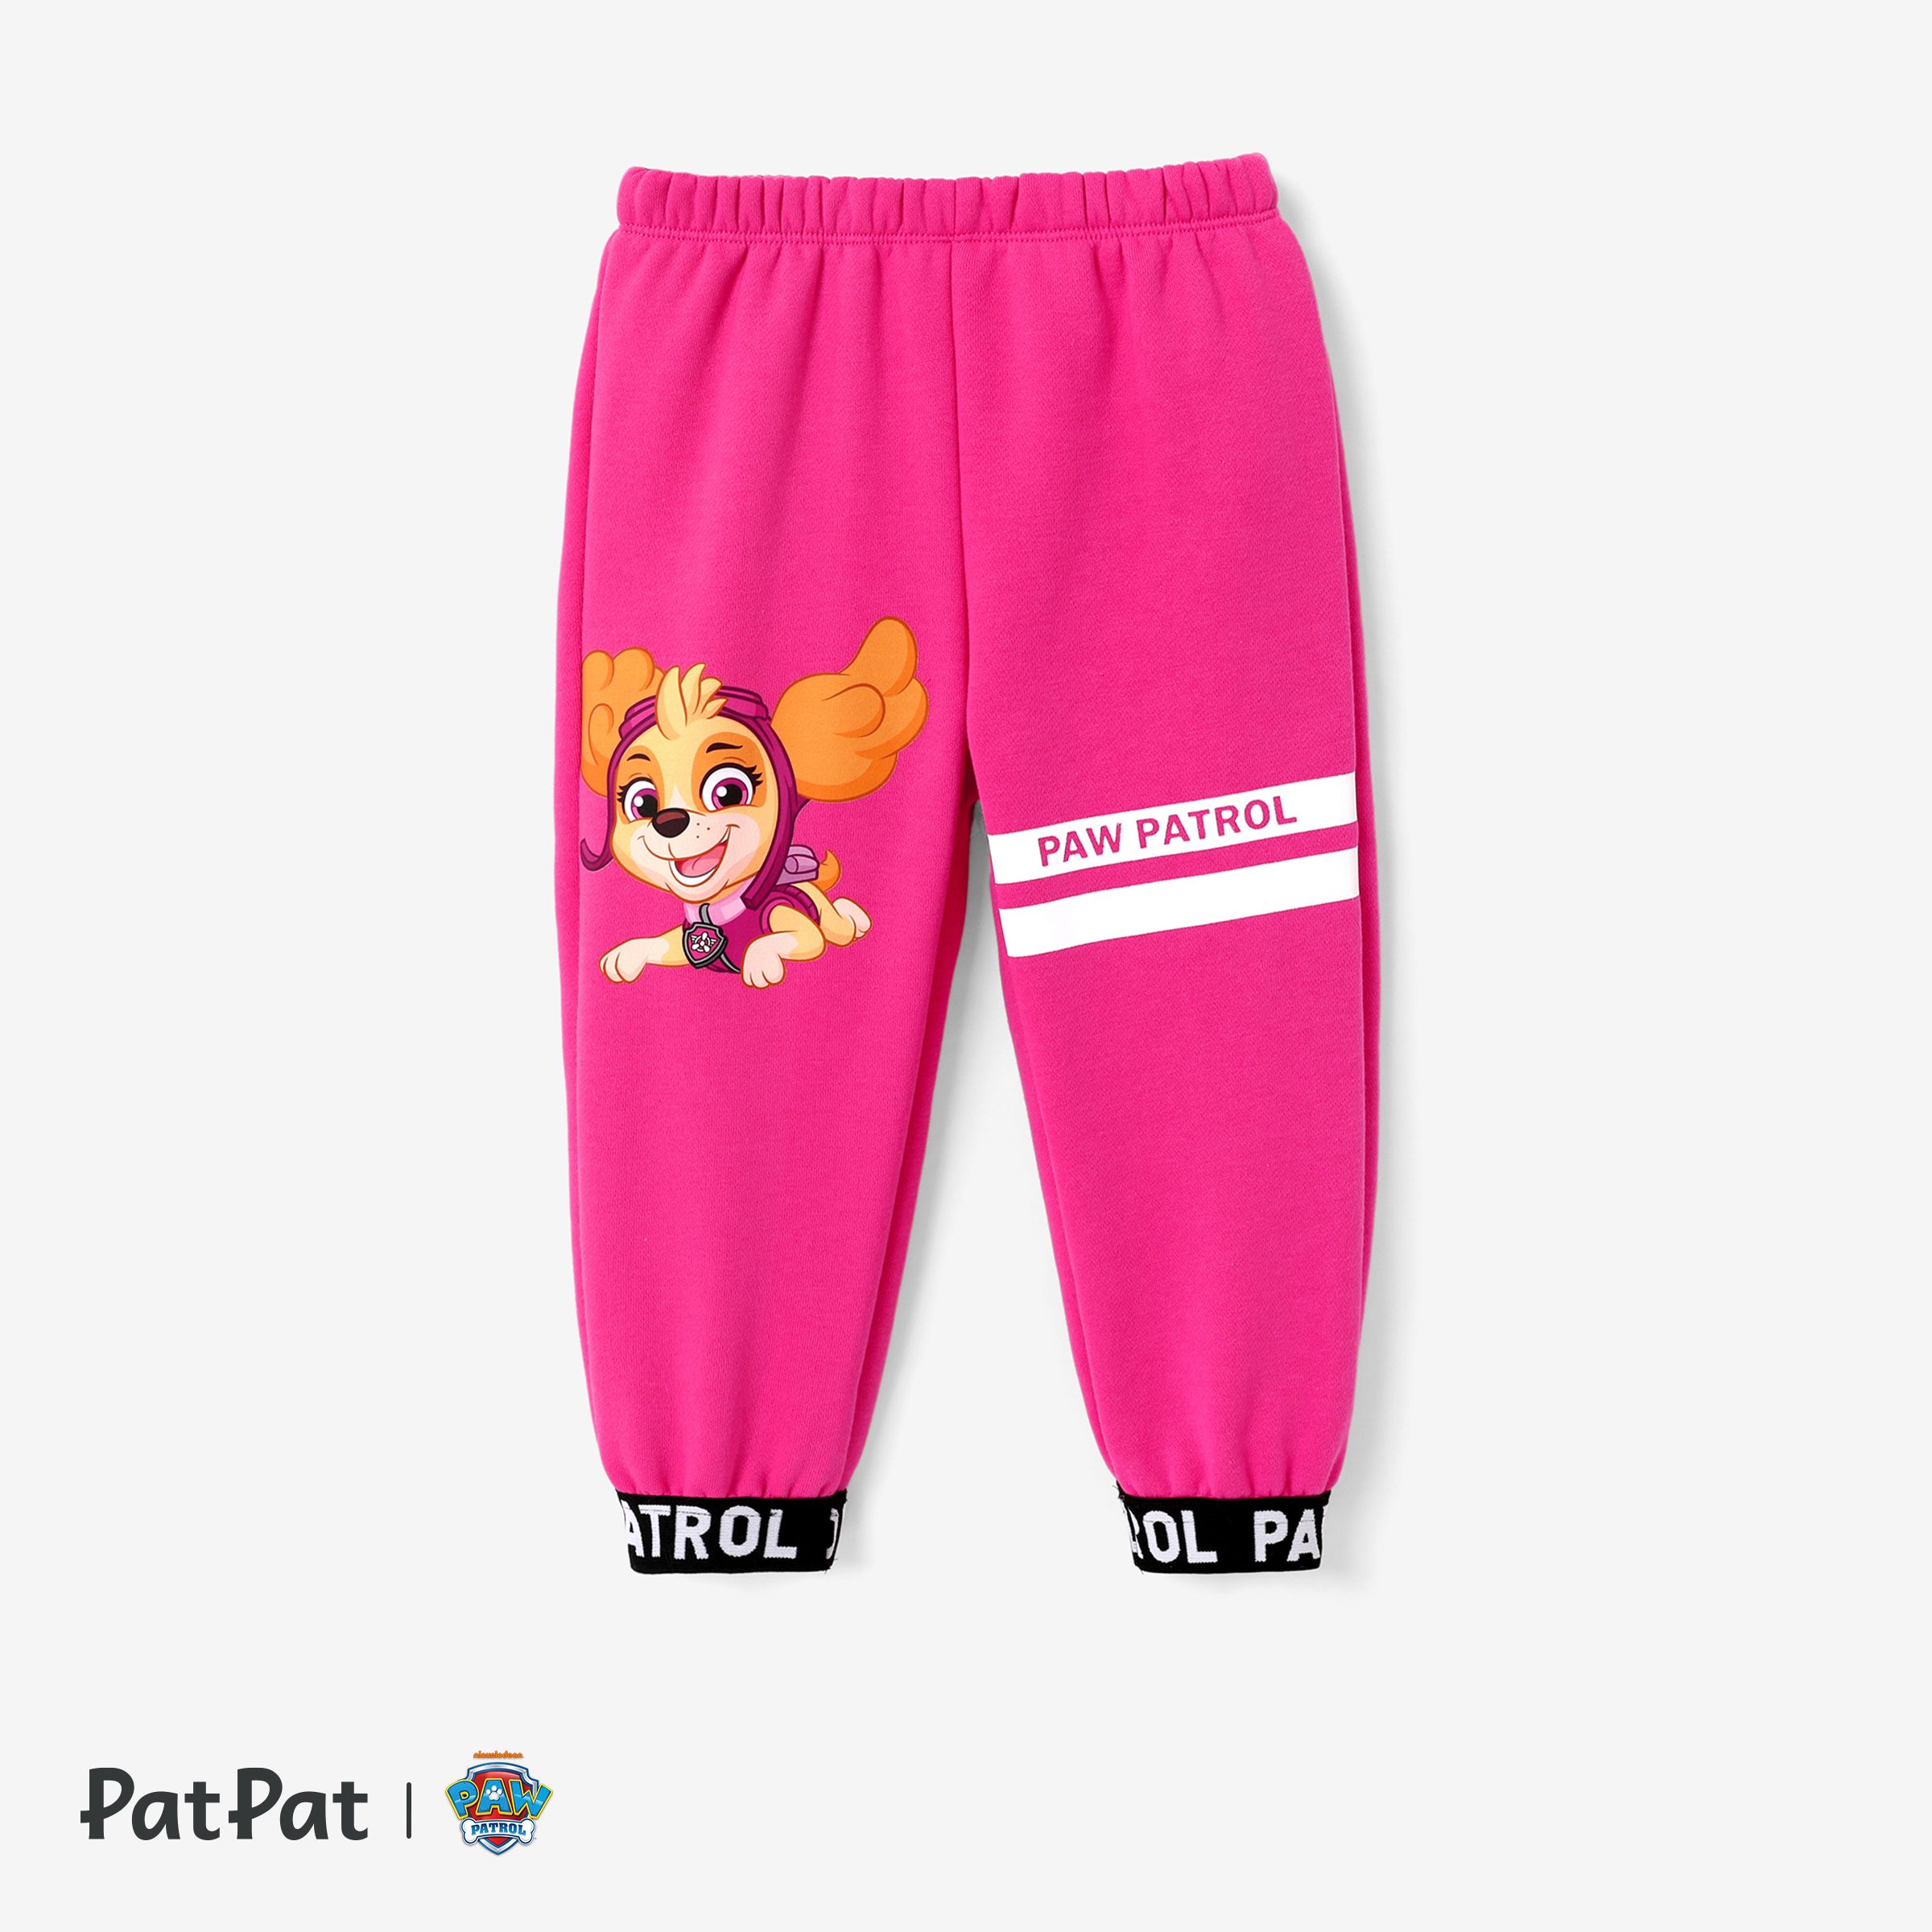 PAW Patrol Little Boys/Girls Toddler Creative Letter Foot Casual Sports Pants